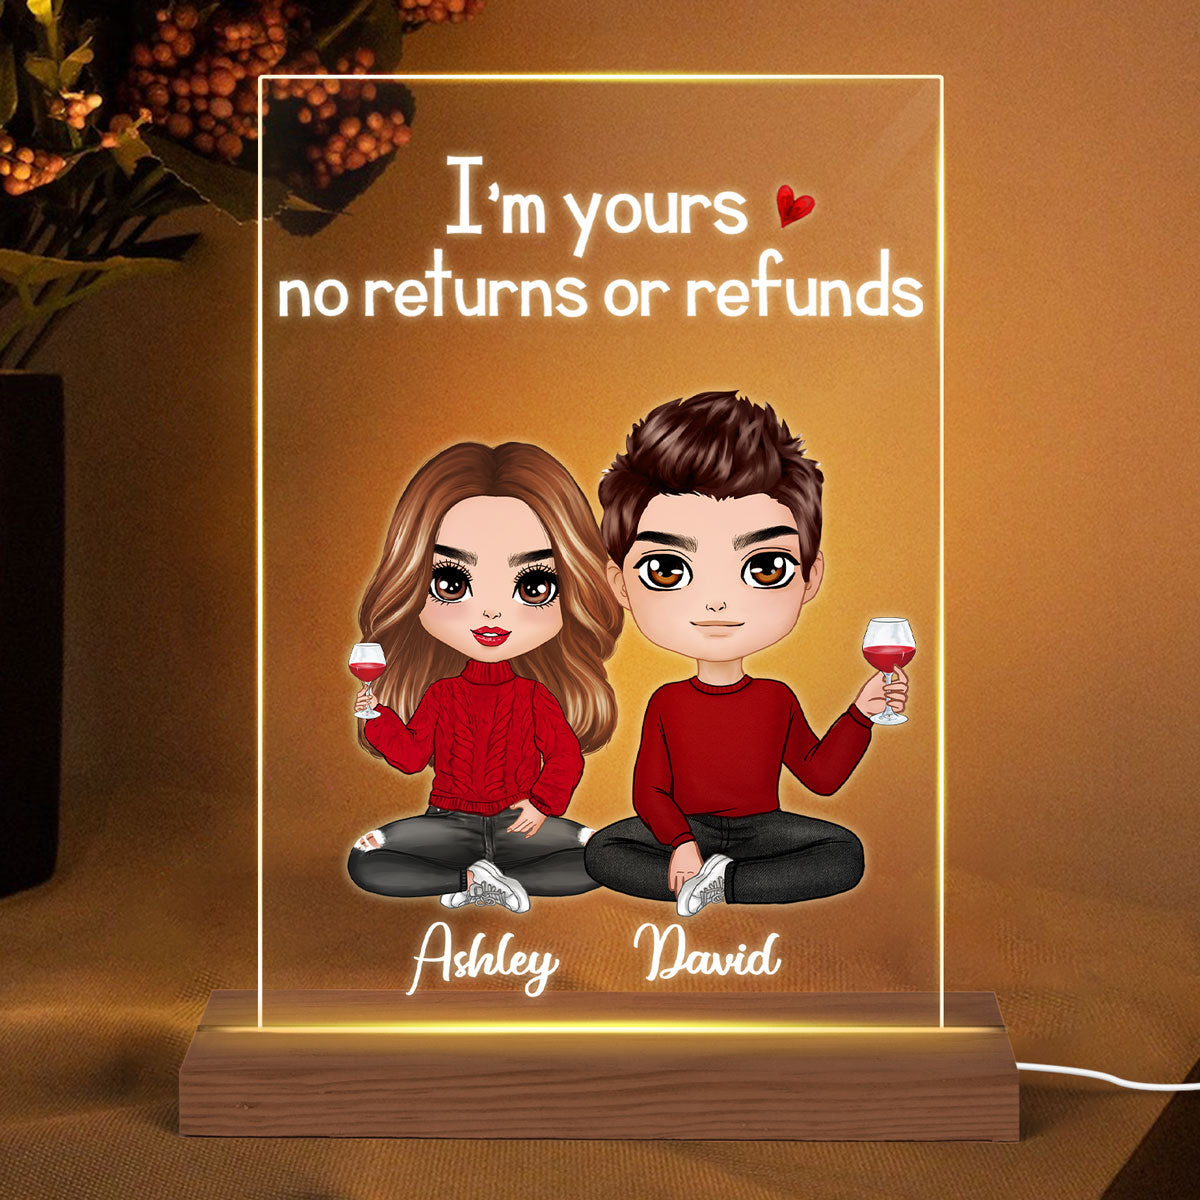 I'm Yours No Returns Or Refunds Doll Couple Sitting Gift For Him Gift For Her Personalized Rectangle Acrylic Plaque LED Lamp Night Light